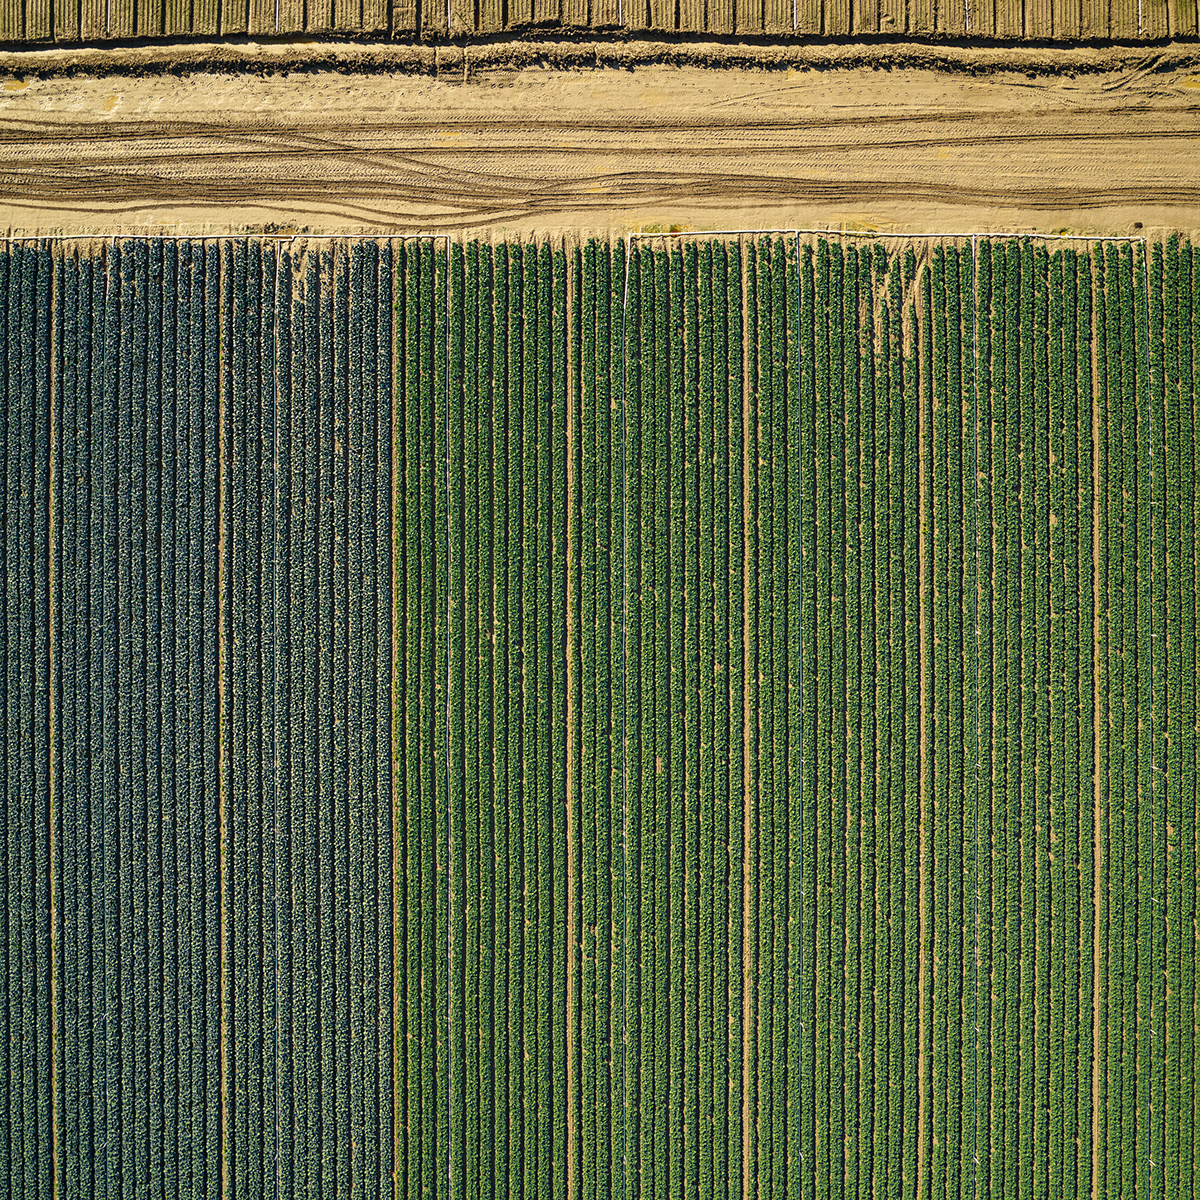 agriculture farm Aerial Photography art land patterns Landscape Beautiful California